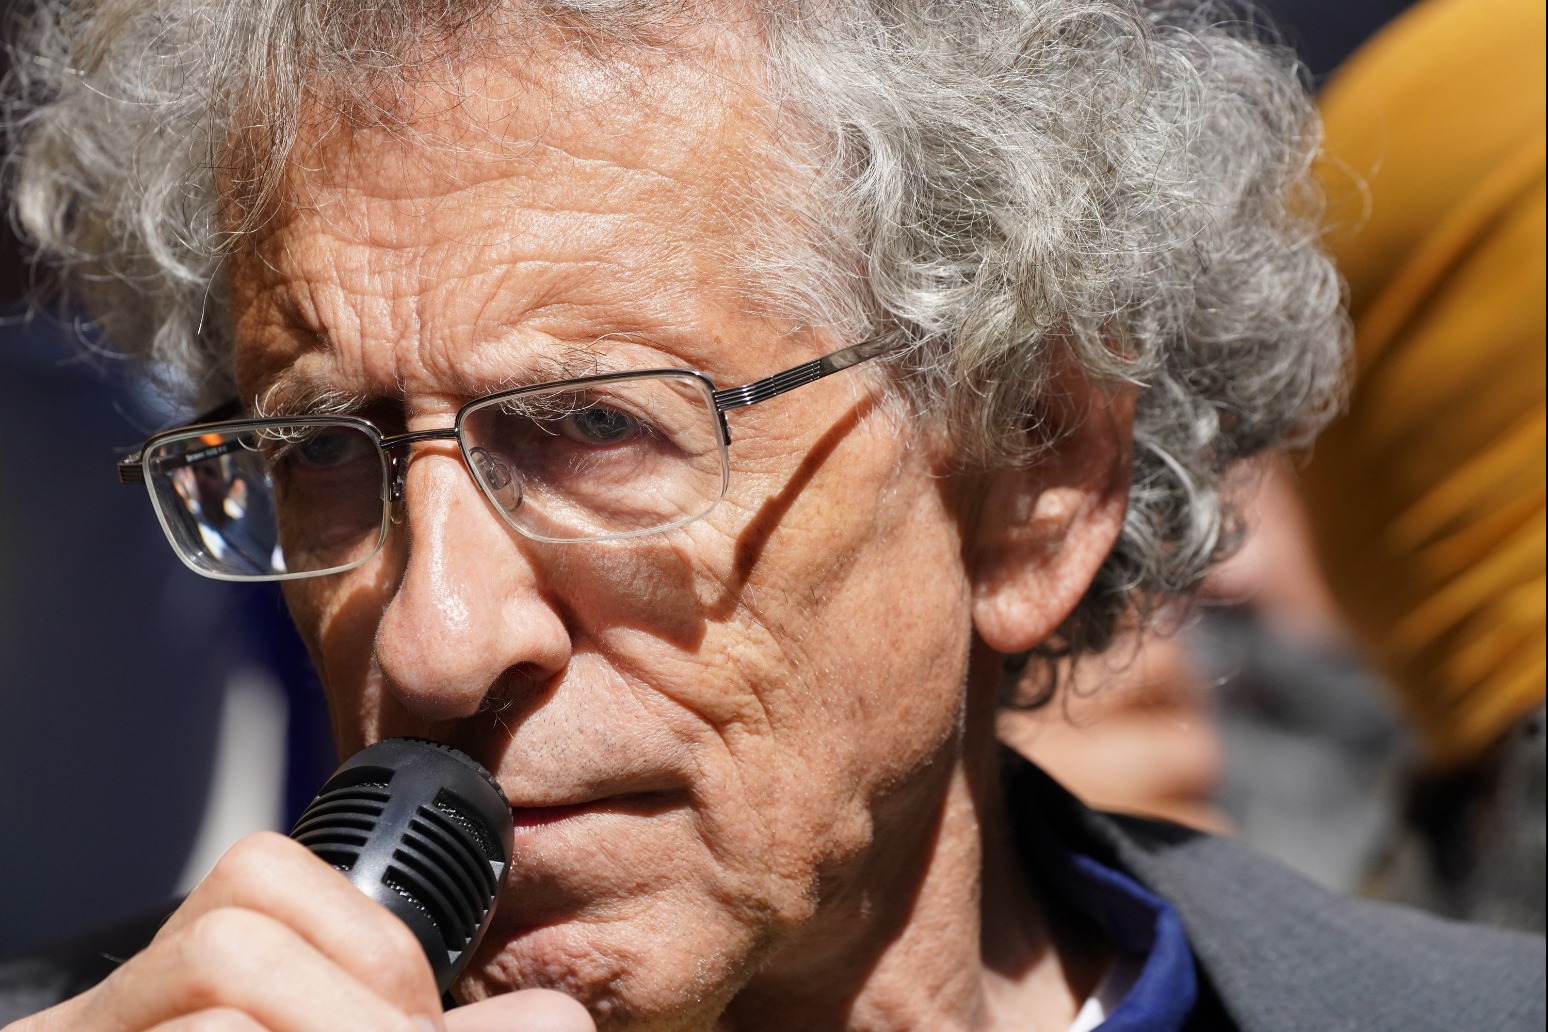 Police assessing video of Piers Corbyn ‘encouraging public to burn MPs’ offices’ 